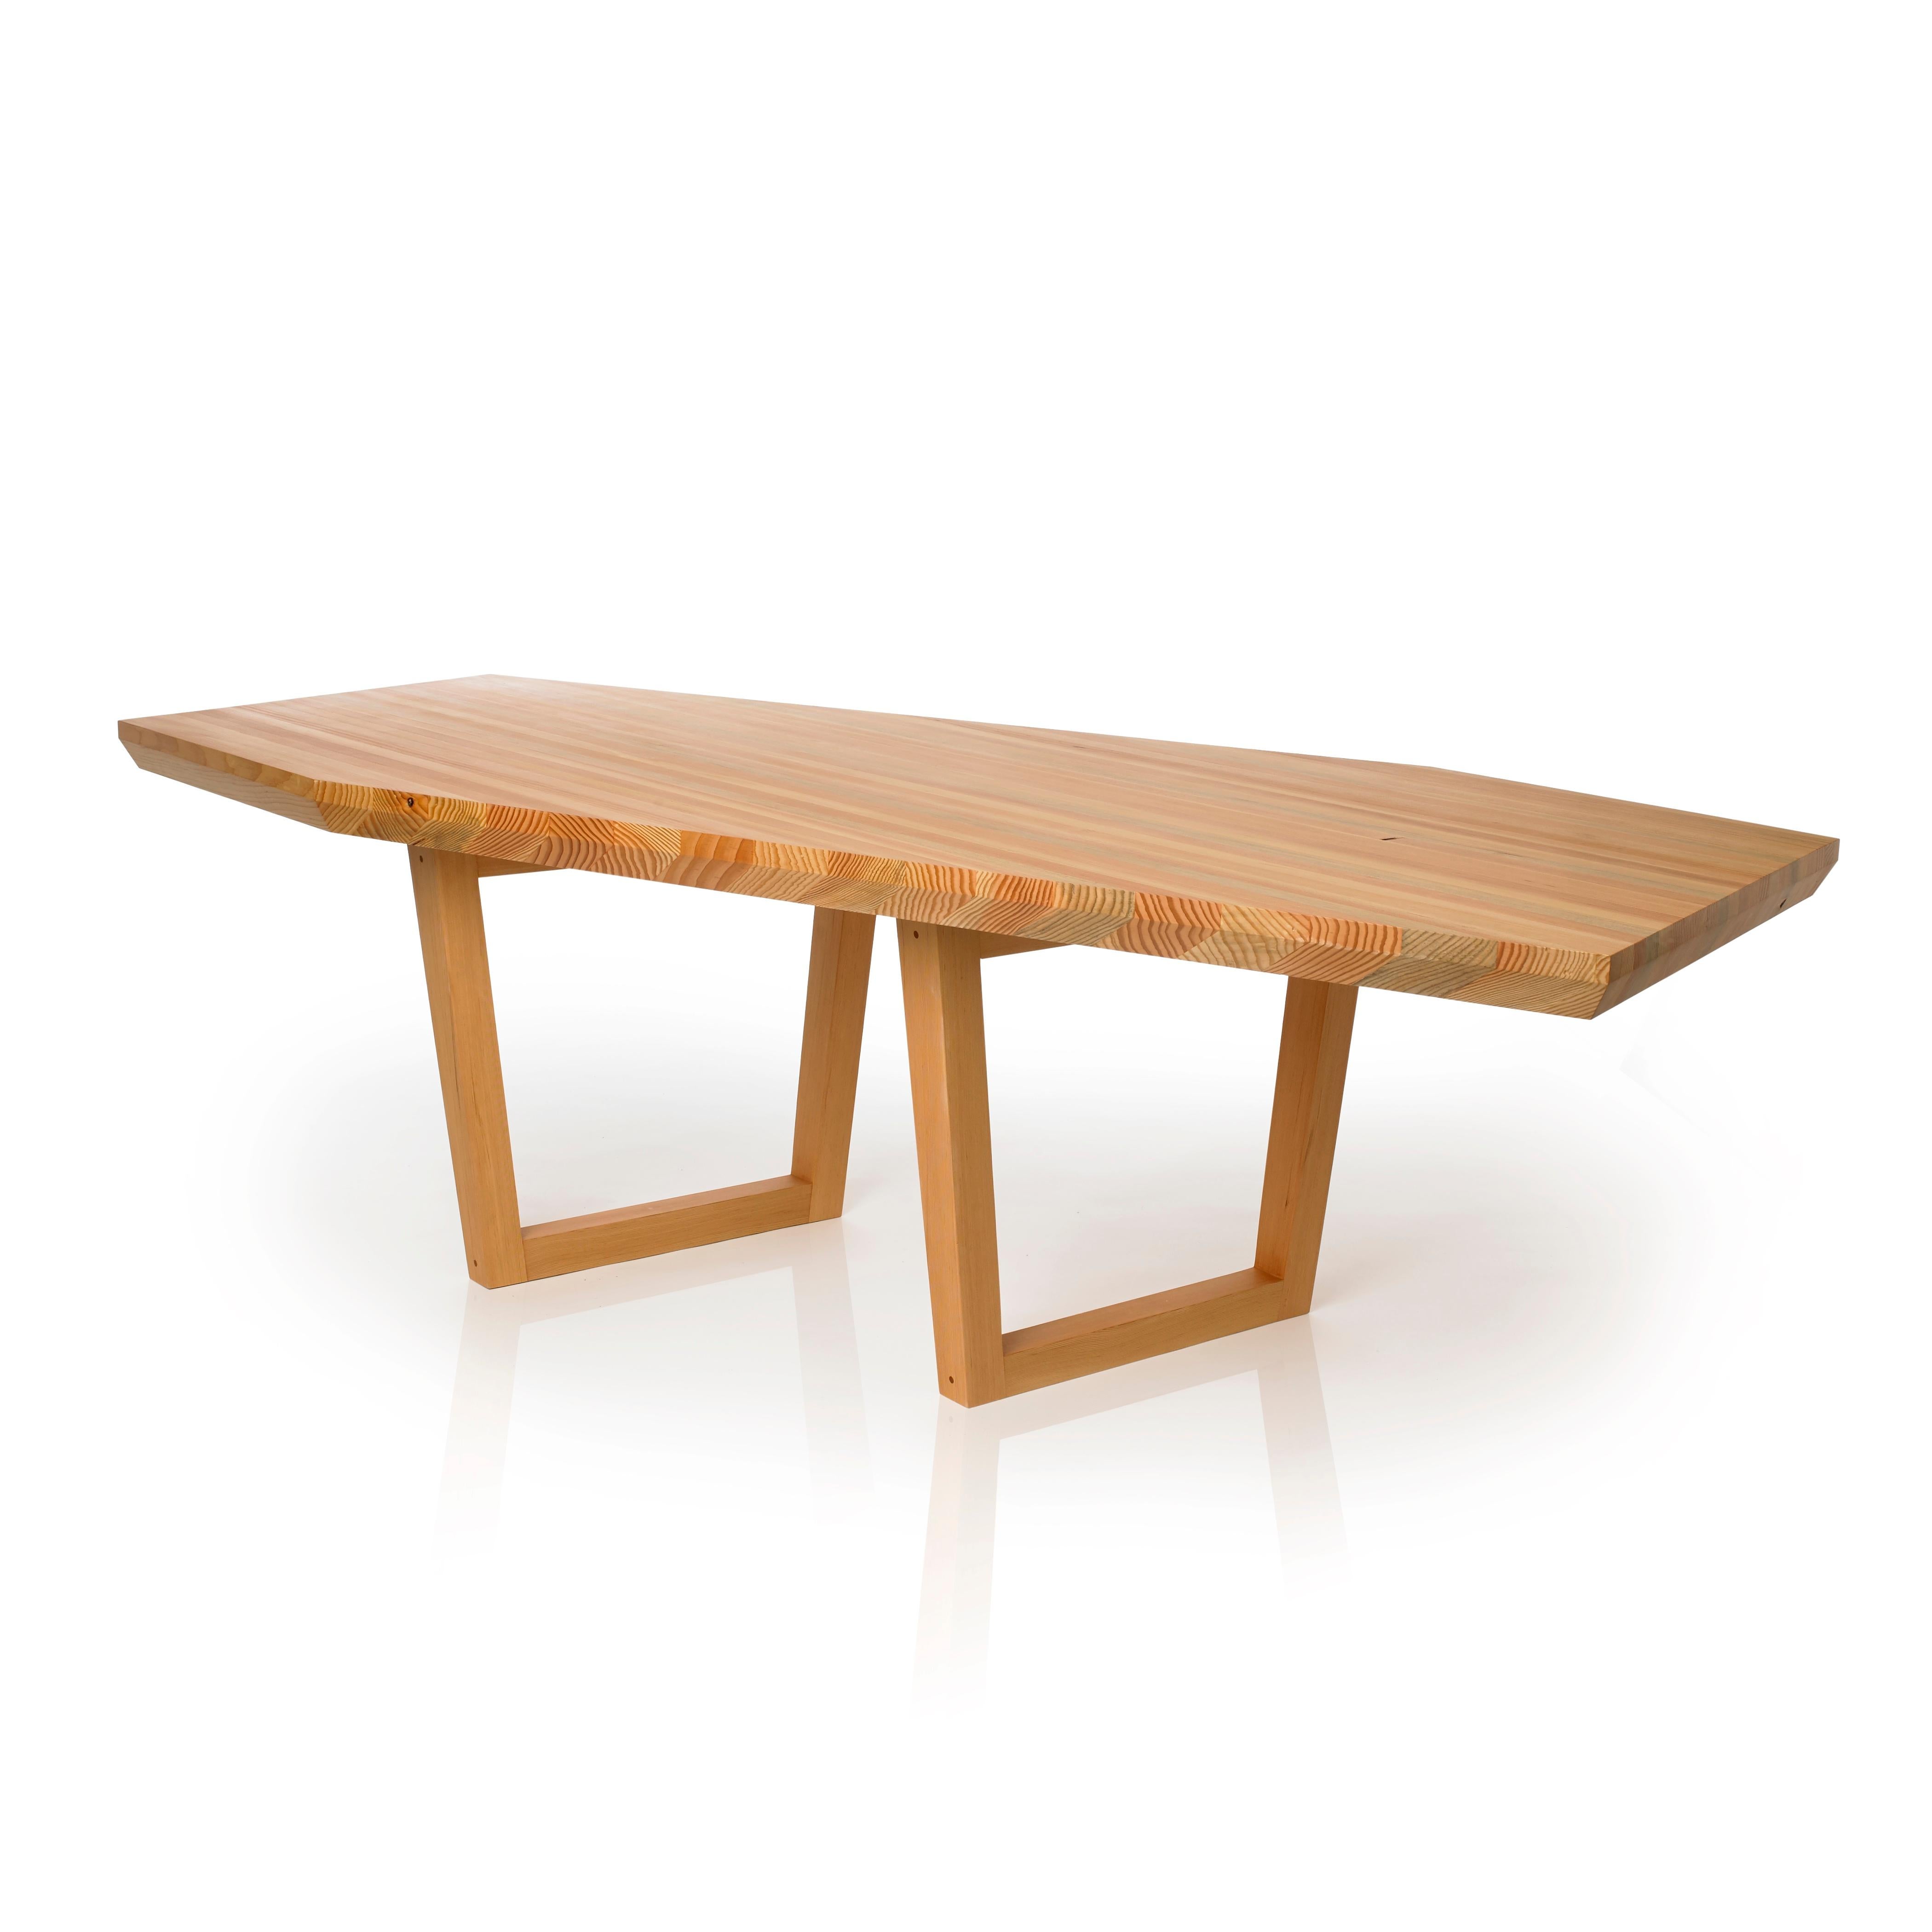 Kaiwa - loosely translated from Japanese meaning conversation. Designed with the intention of fostering connection and dialogue, this table is more than just a piece of furniture; it's a work of art that invites interaction and engagement.

Crafted